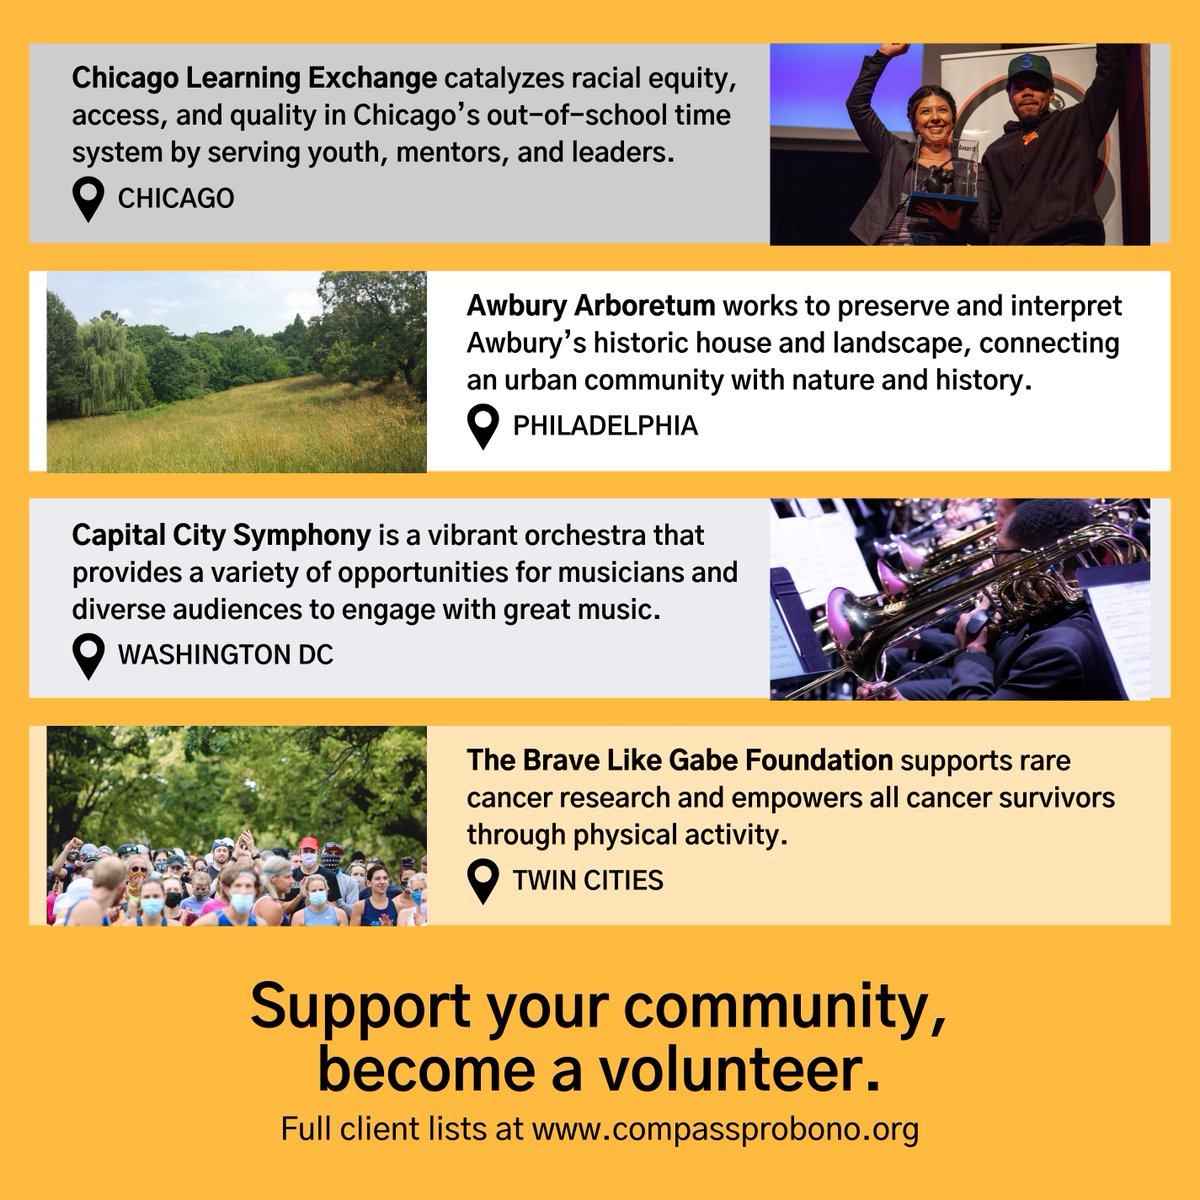 From music to research, #nonprofits play a pivotal role in our communities. You can support them by volunteering on a consulting project. Learn more: Chicago bit.ly/CH-bp22 DC bit.ly/DC-bp22 Philly bit.ly/PH-bp22 Twin Cities bit.ly/TC-bp22